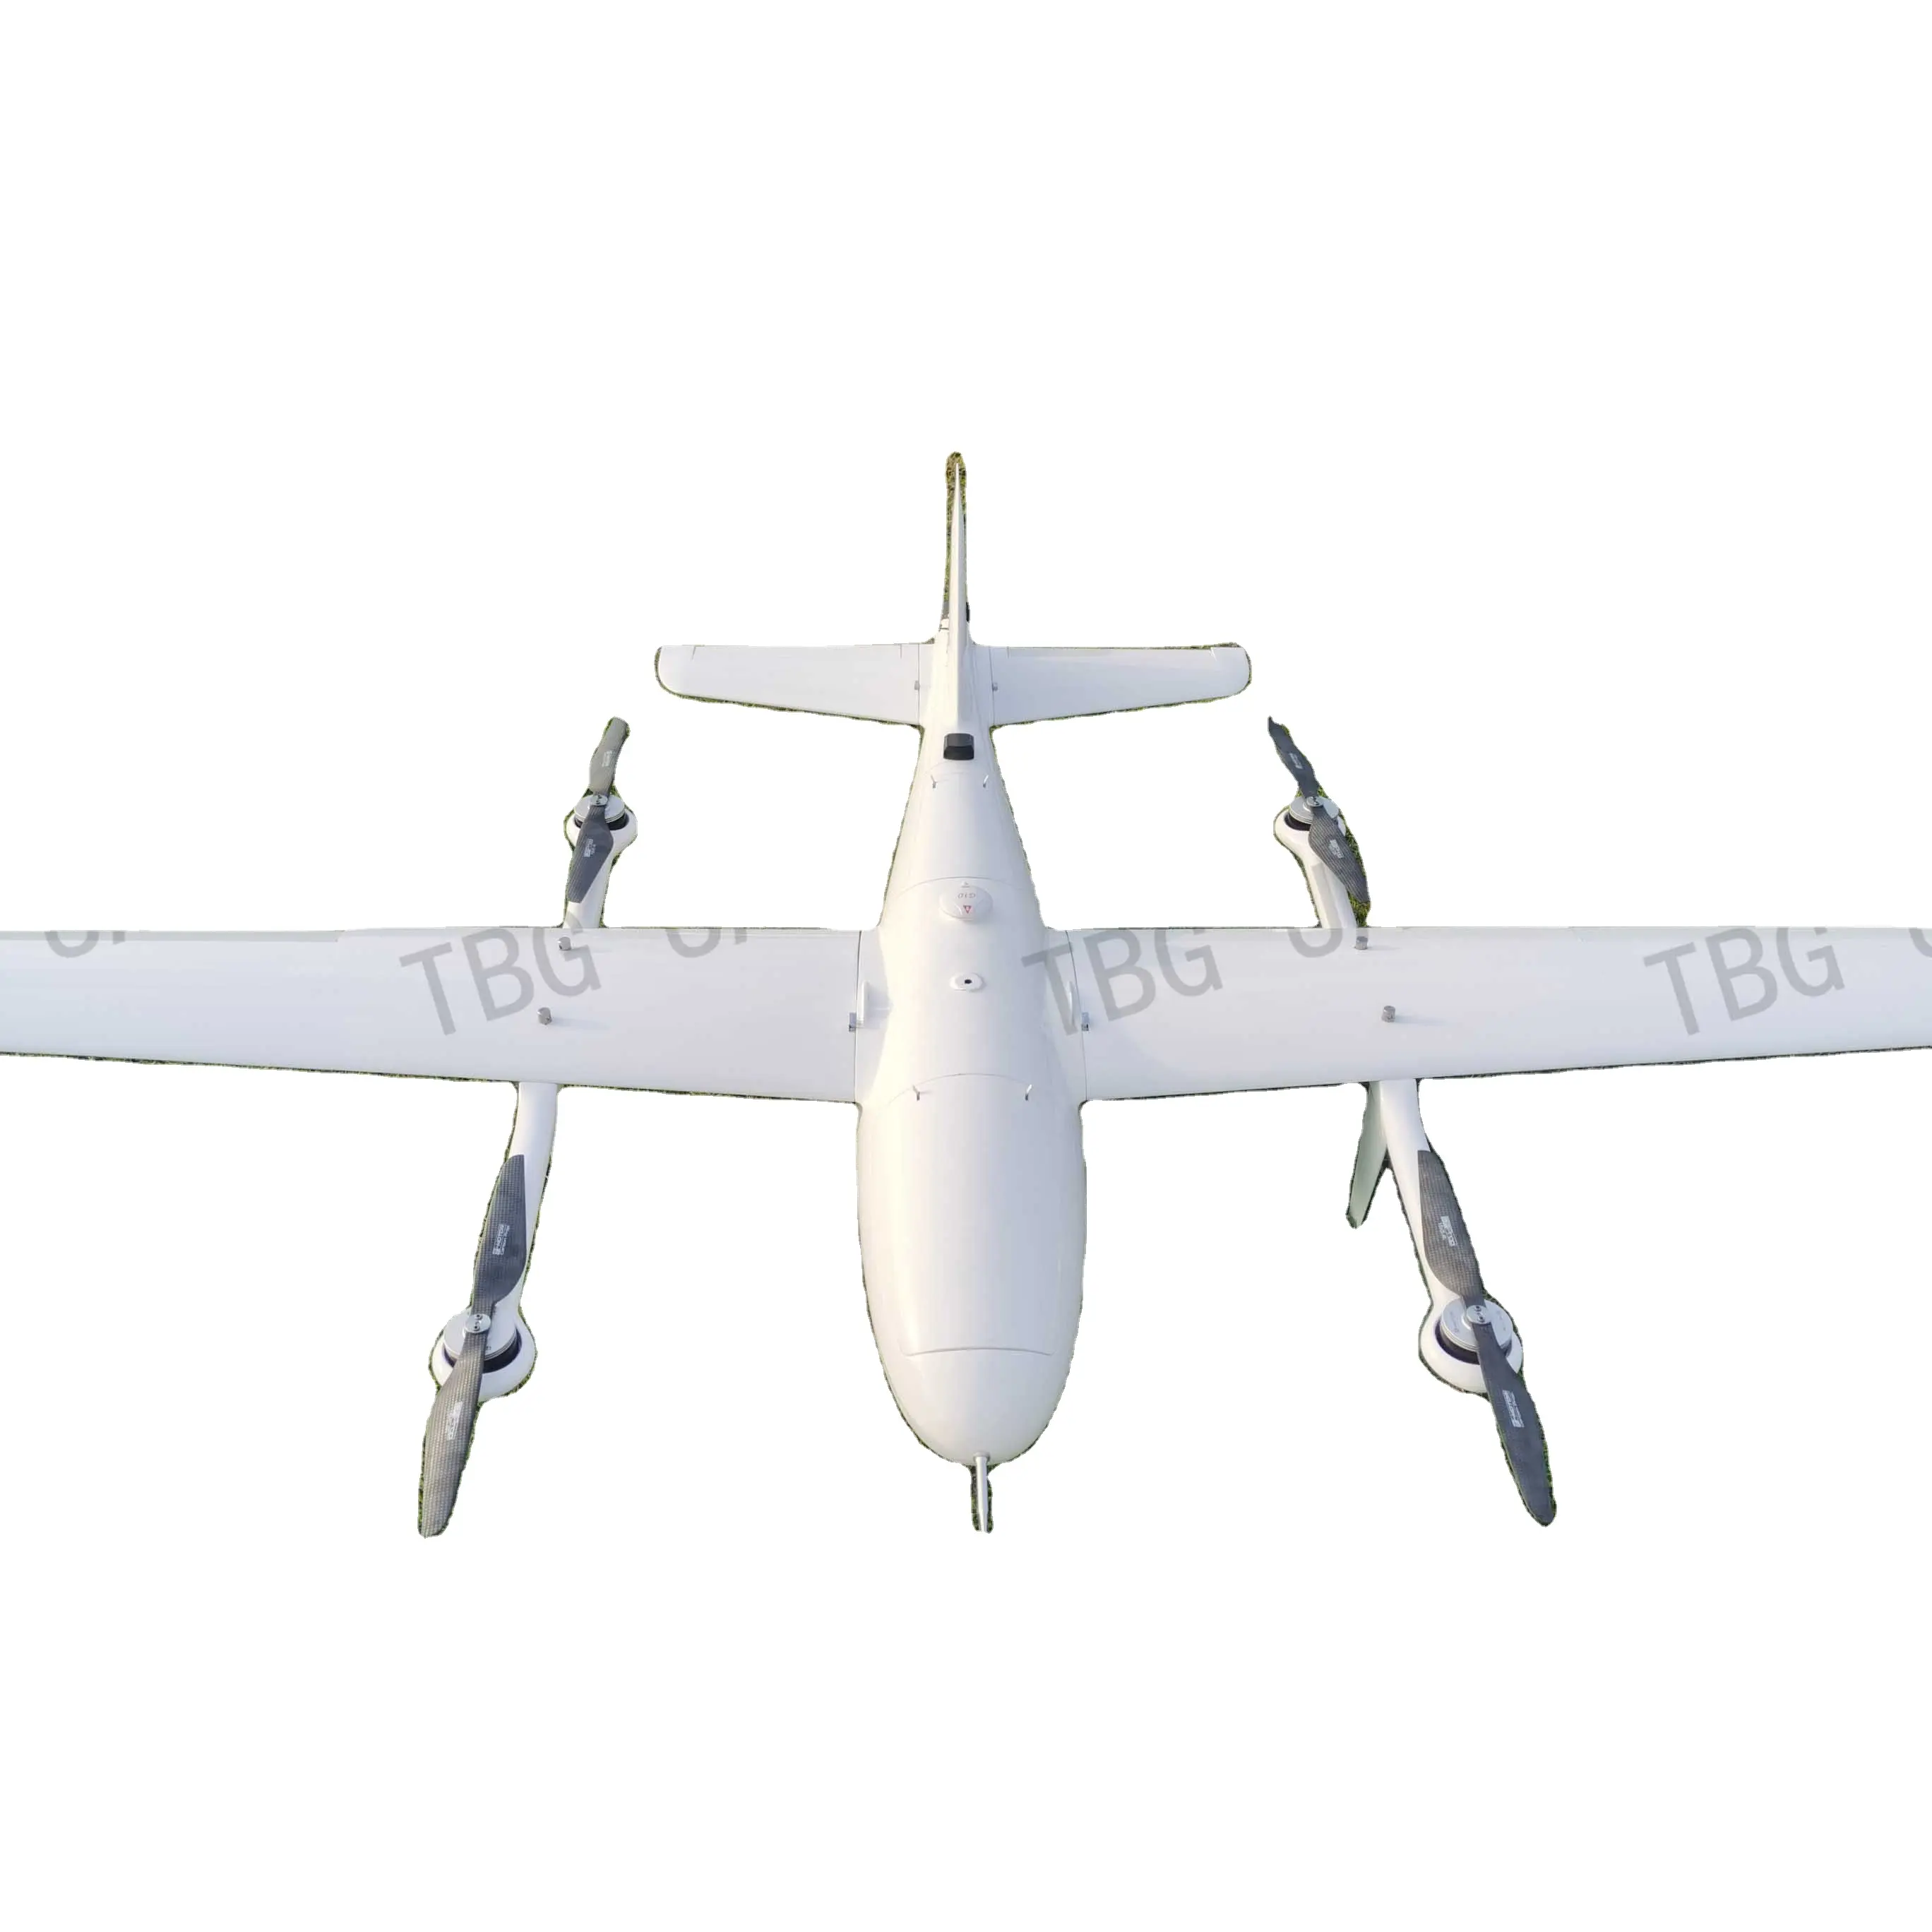 TBG M25 3.5H Unmanned Aerial Vehicle Mapping Survey Surveillance Fix Wing Drones VTOL UAV Aircraft